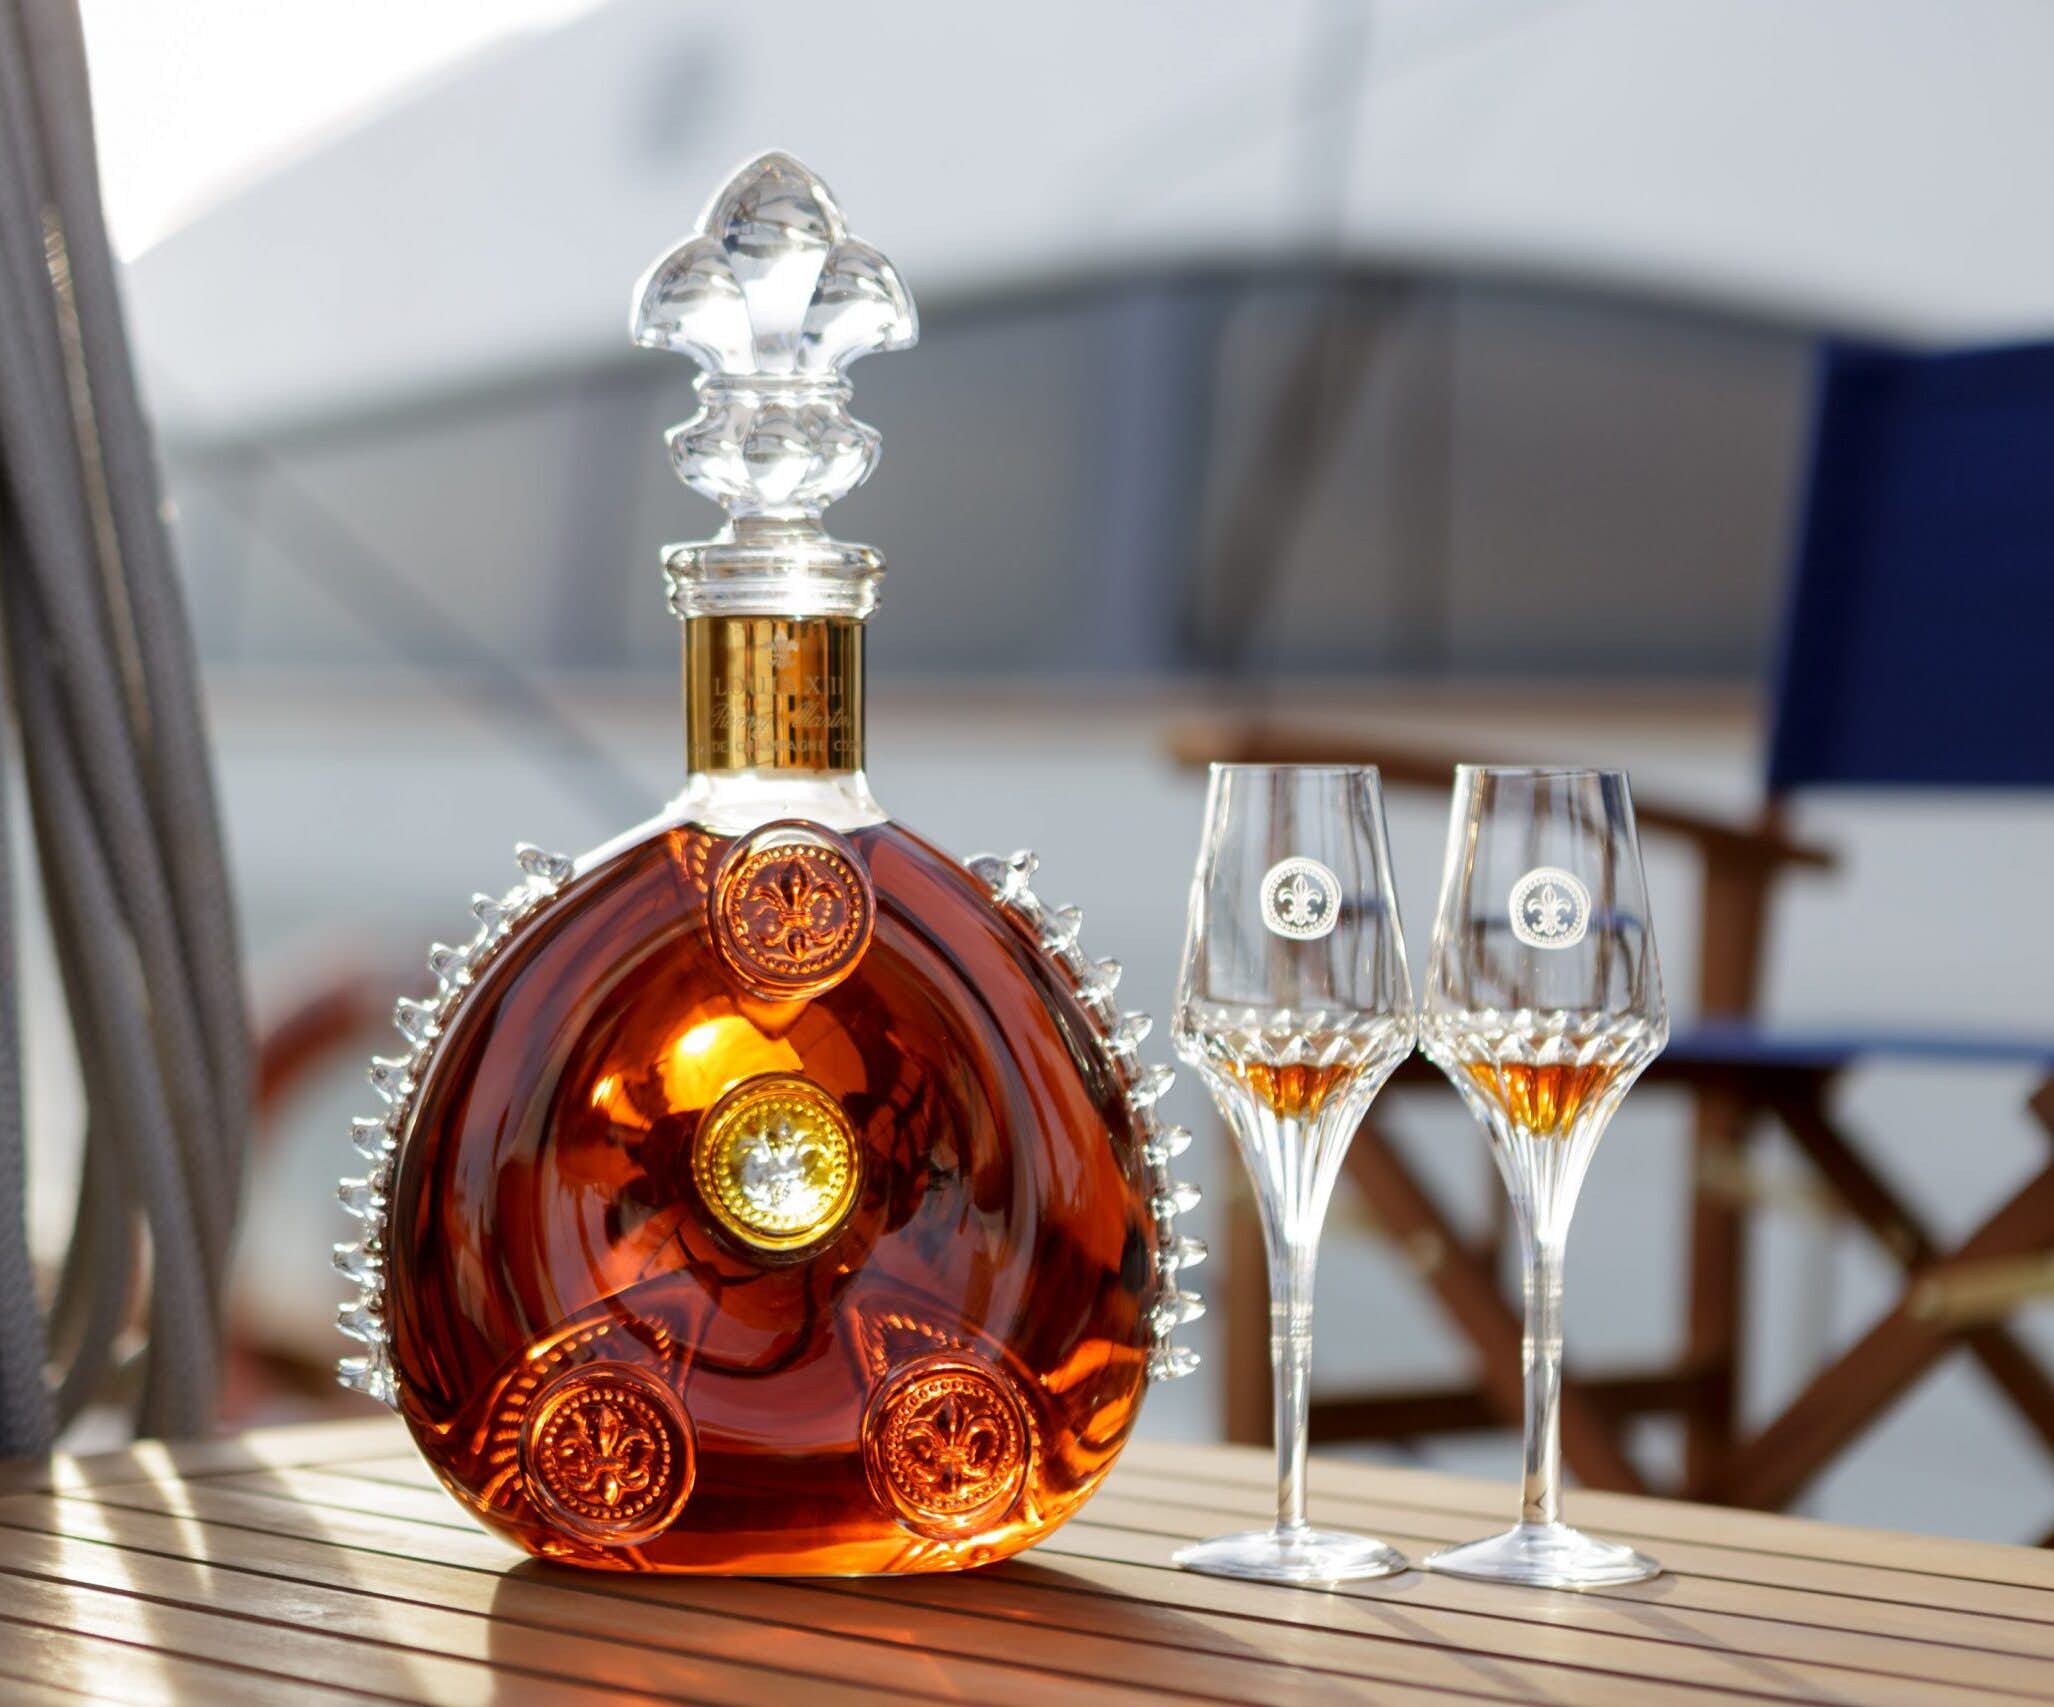 LOUIS XIII decanter, limited edition decanters